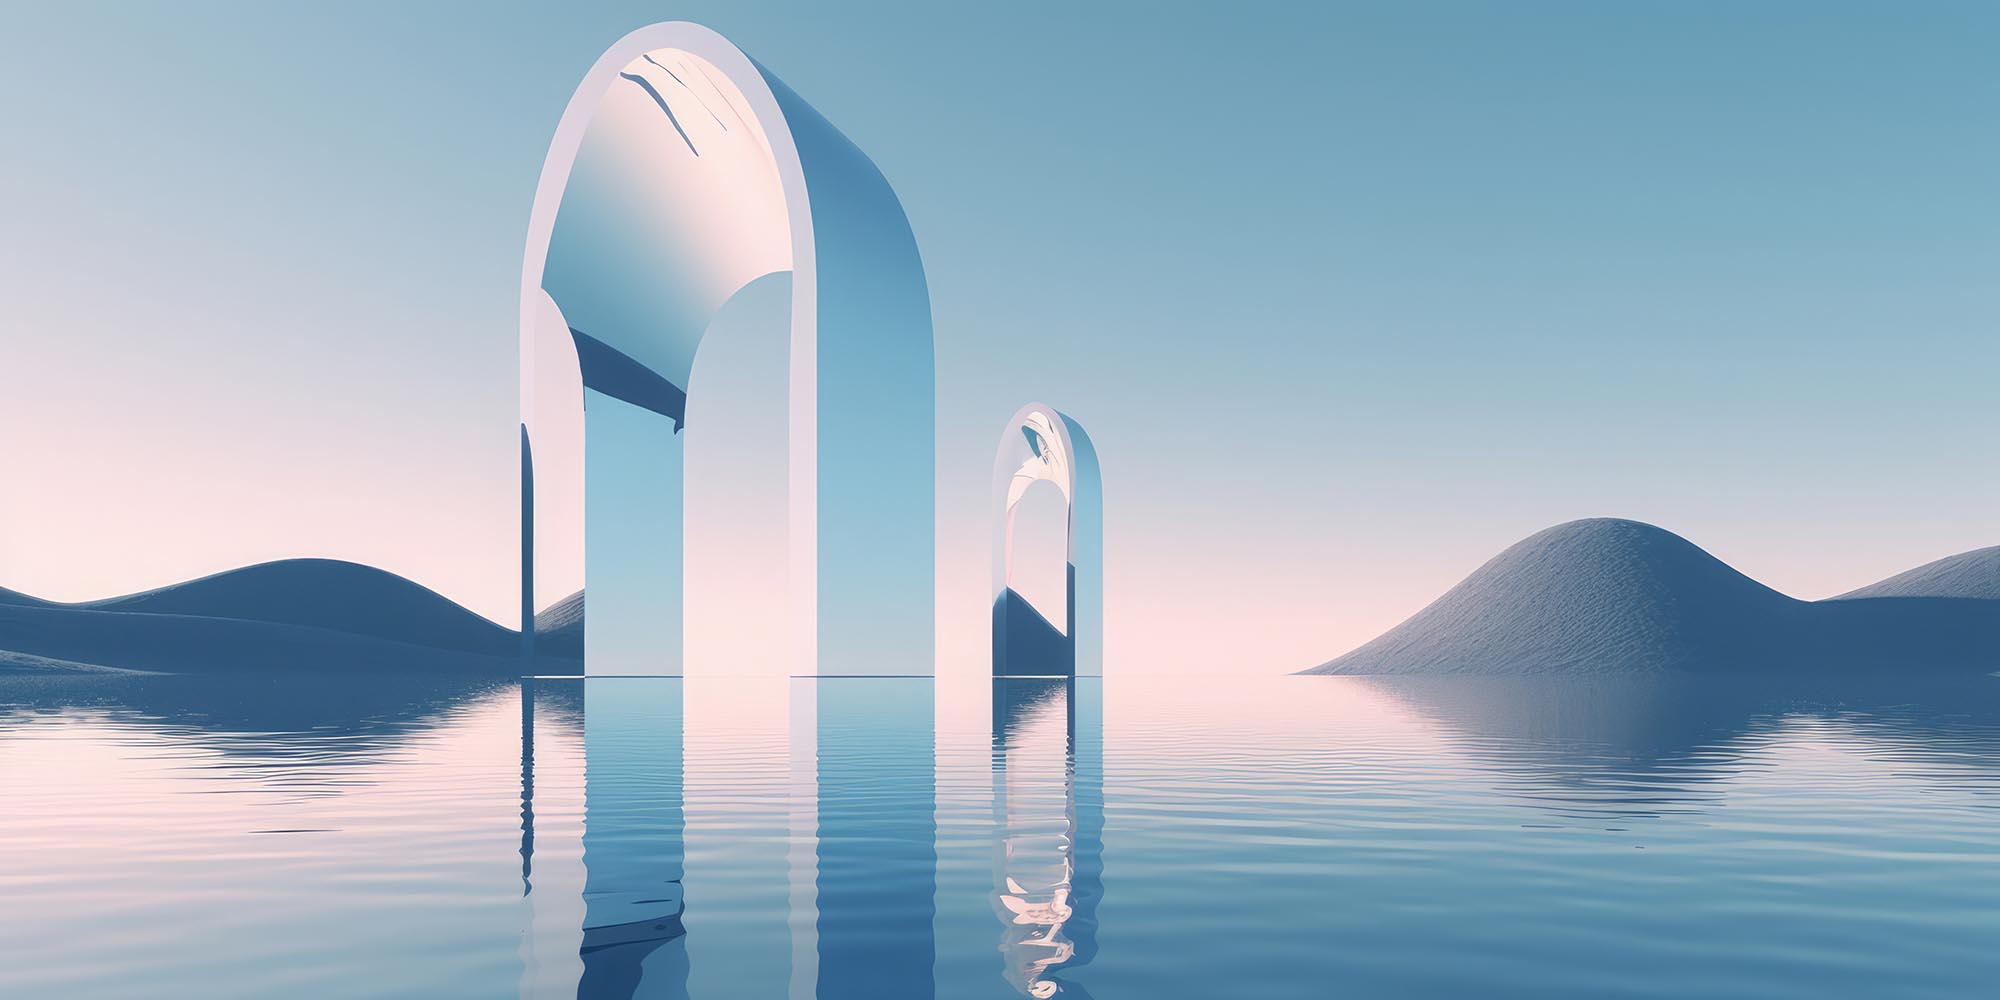 northern futuristic landscape, fantastic scenery with calm water, simple geometric mirror arches and pastel blue gradient sky